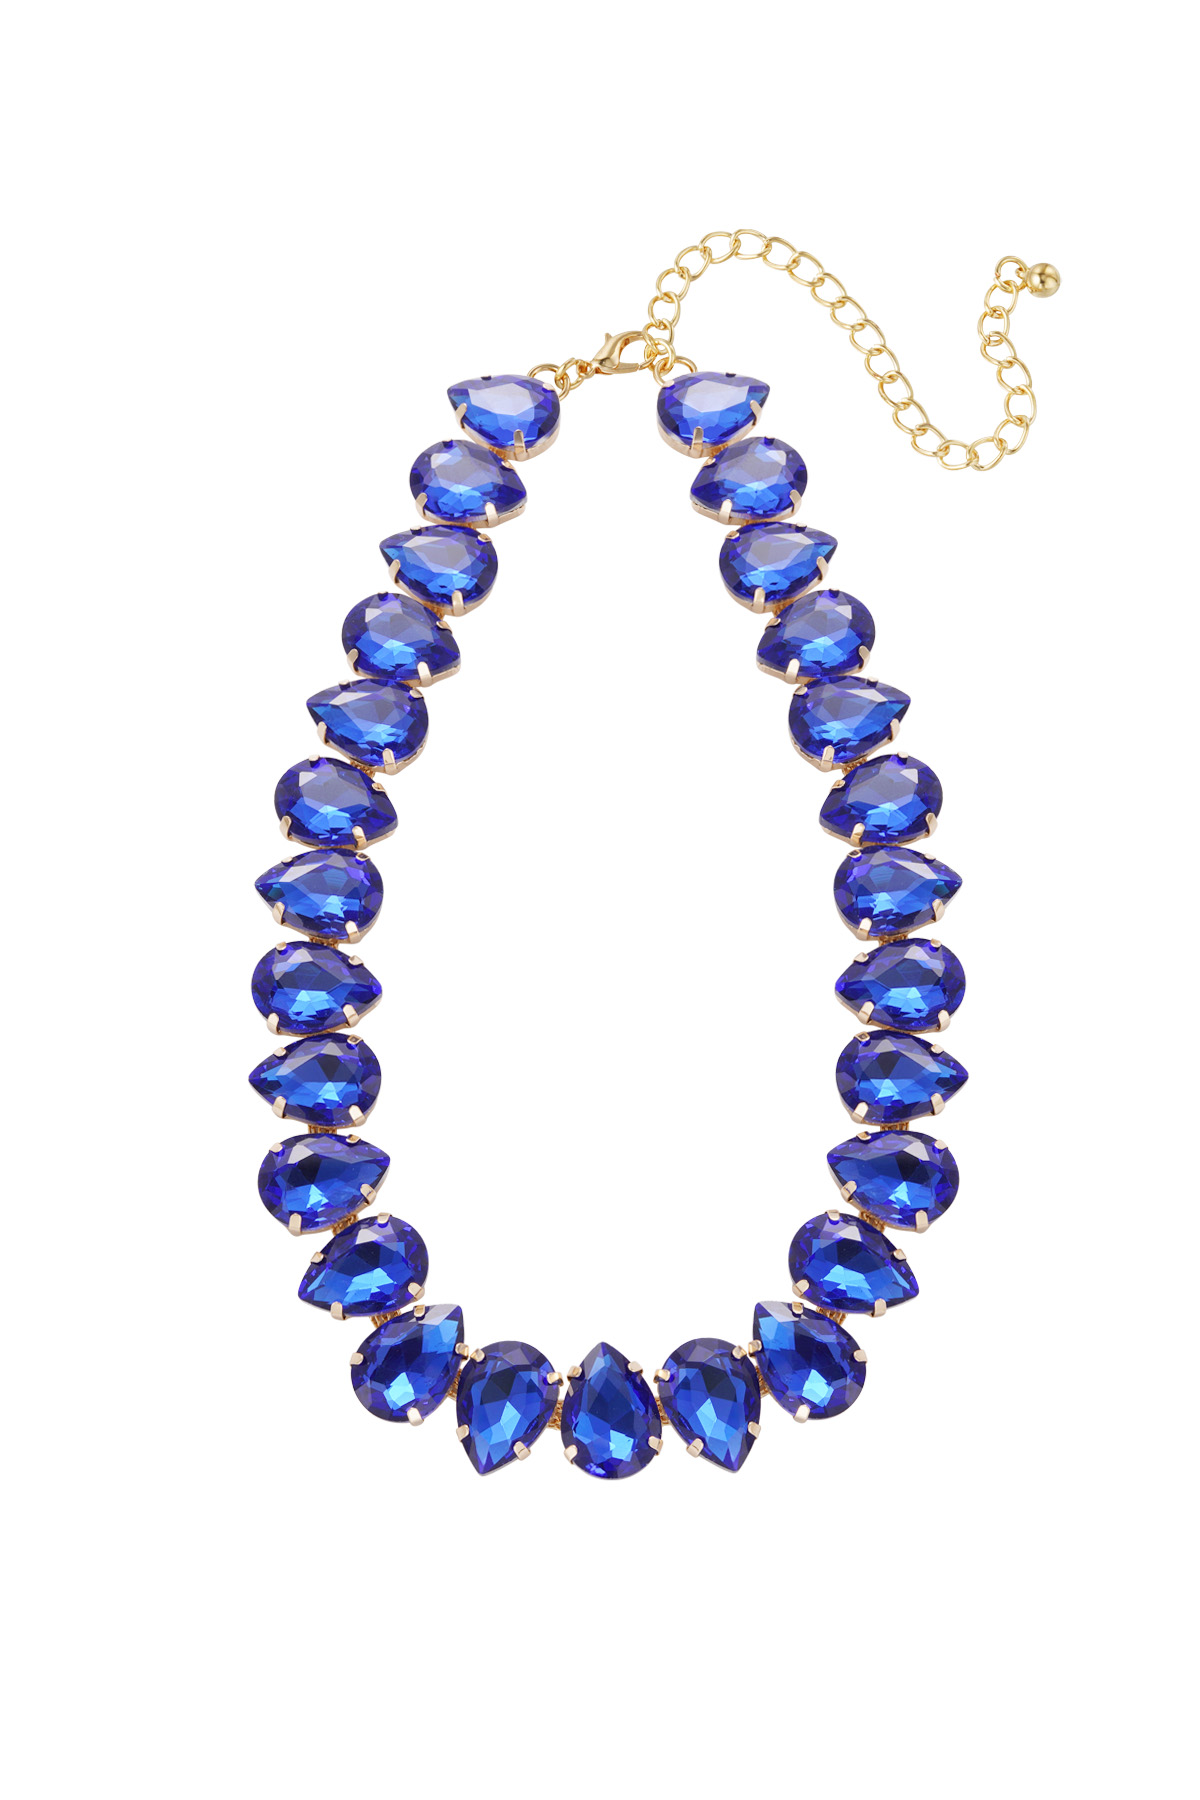 Necklace large beads - blue 